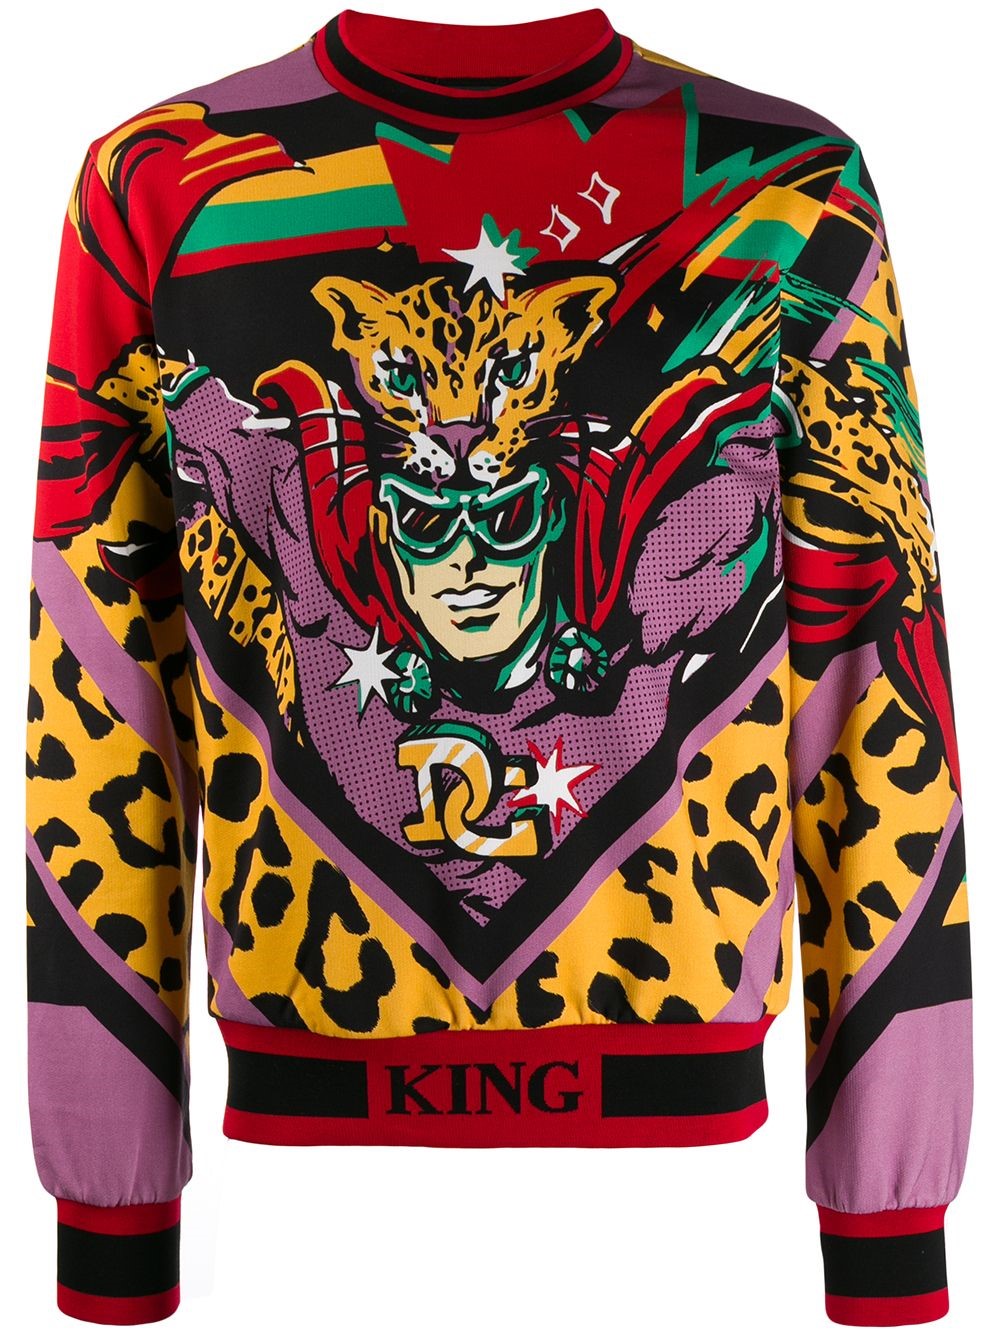 dolce & gabbana KING PRINT SWEATER available on montiboutique.com - 28787